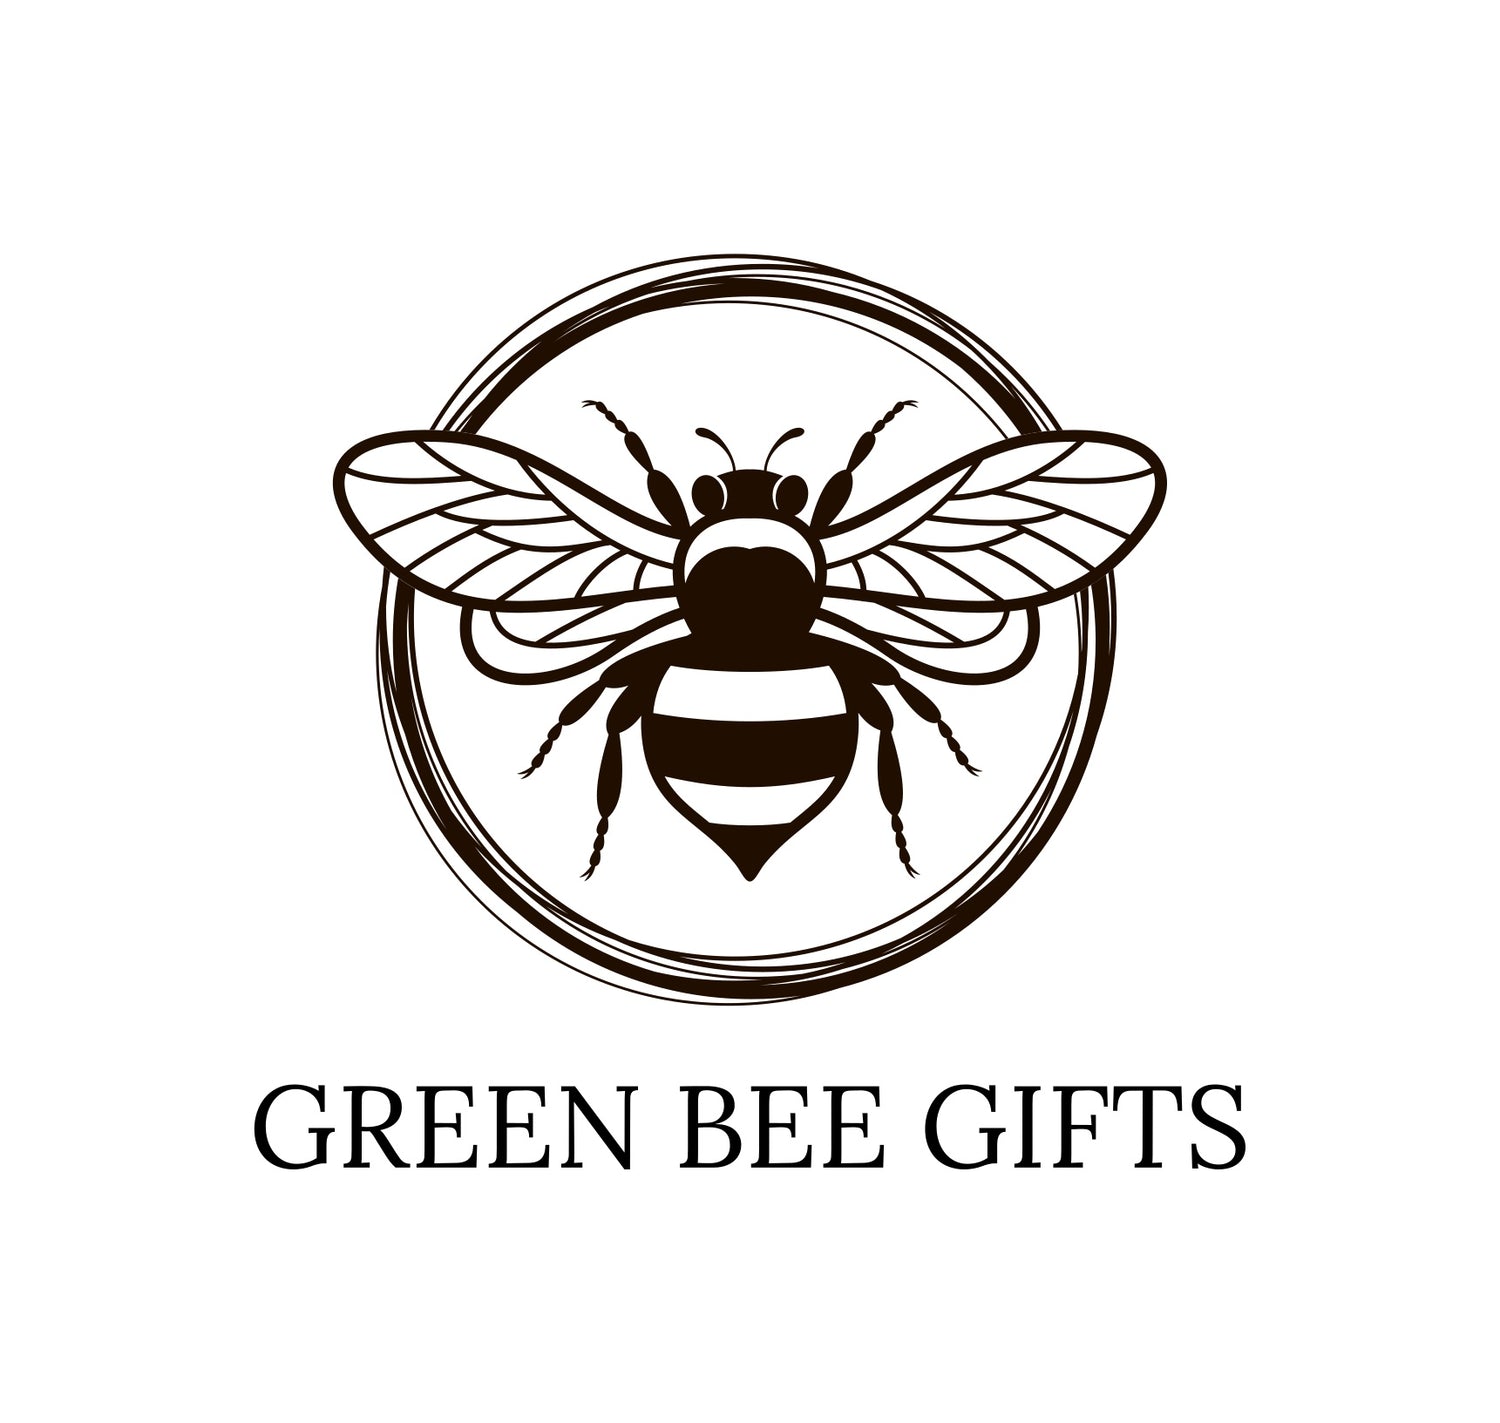 Personalized Gifts – GreenBeeGifts